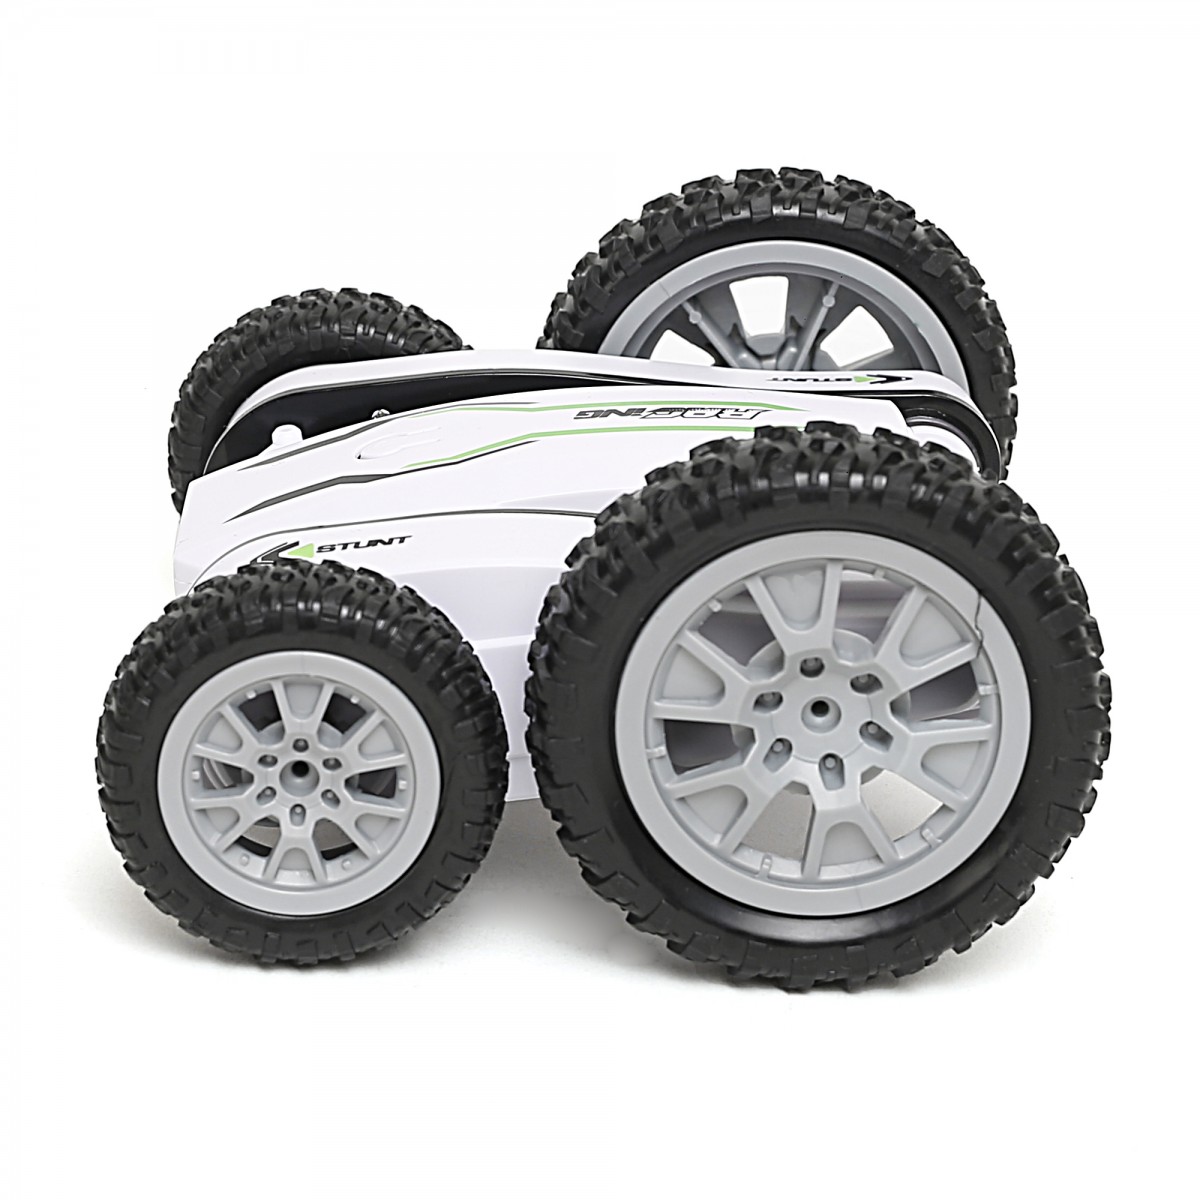 Ralleyz Flip Stunt Racer Remote Control Car for Kids with Charger, White, 6Y+